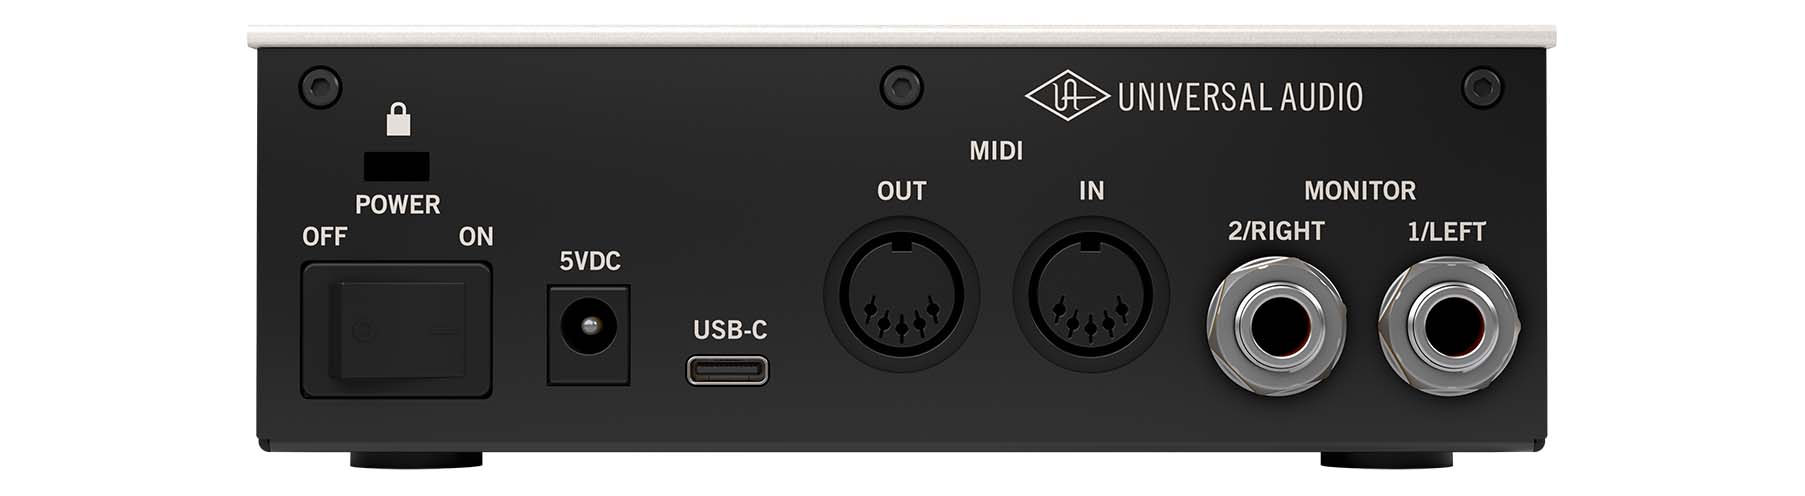 Universal Audio VOLT1 - 1-in/2-out USB 2.0 Audio Interface